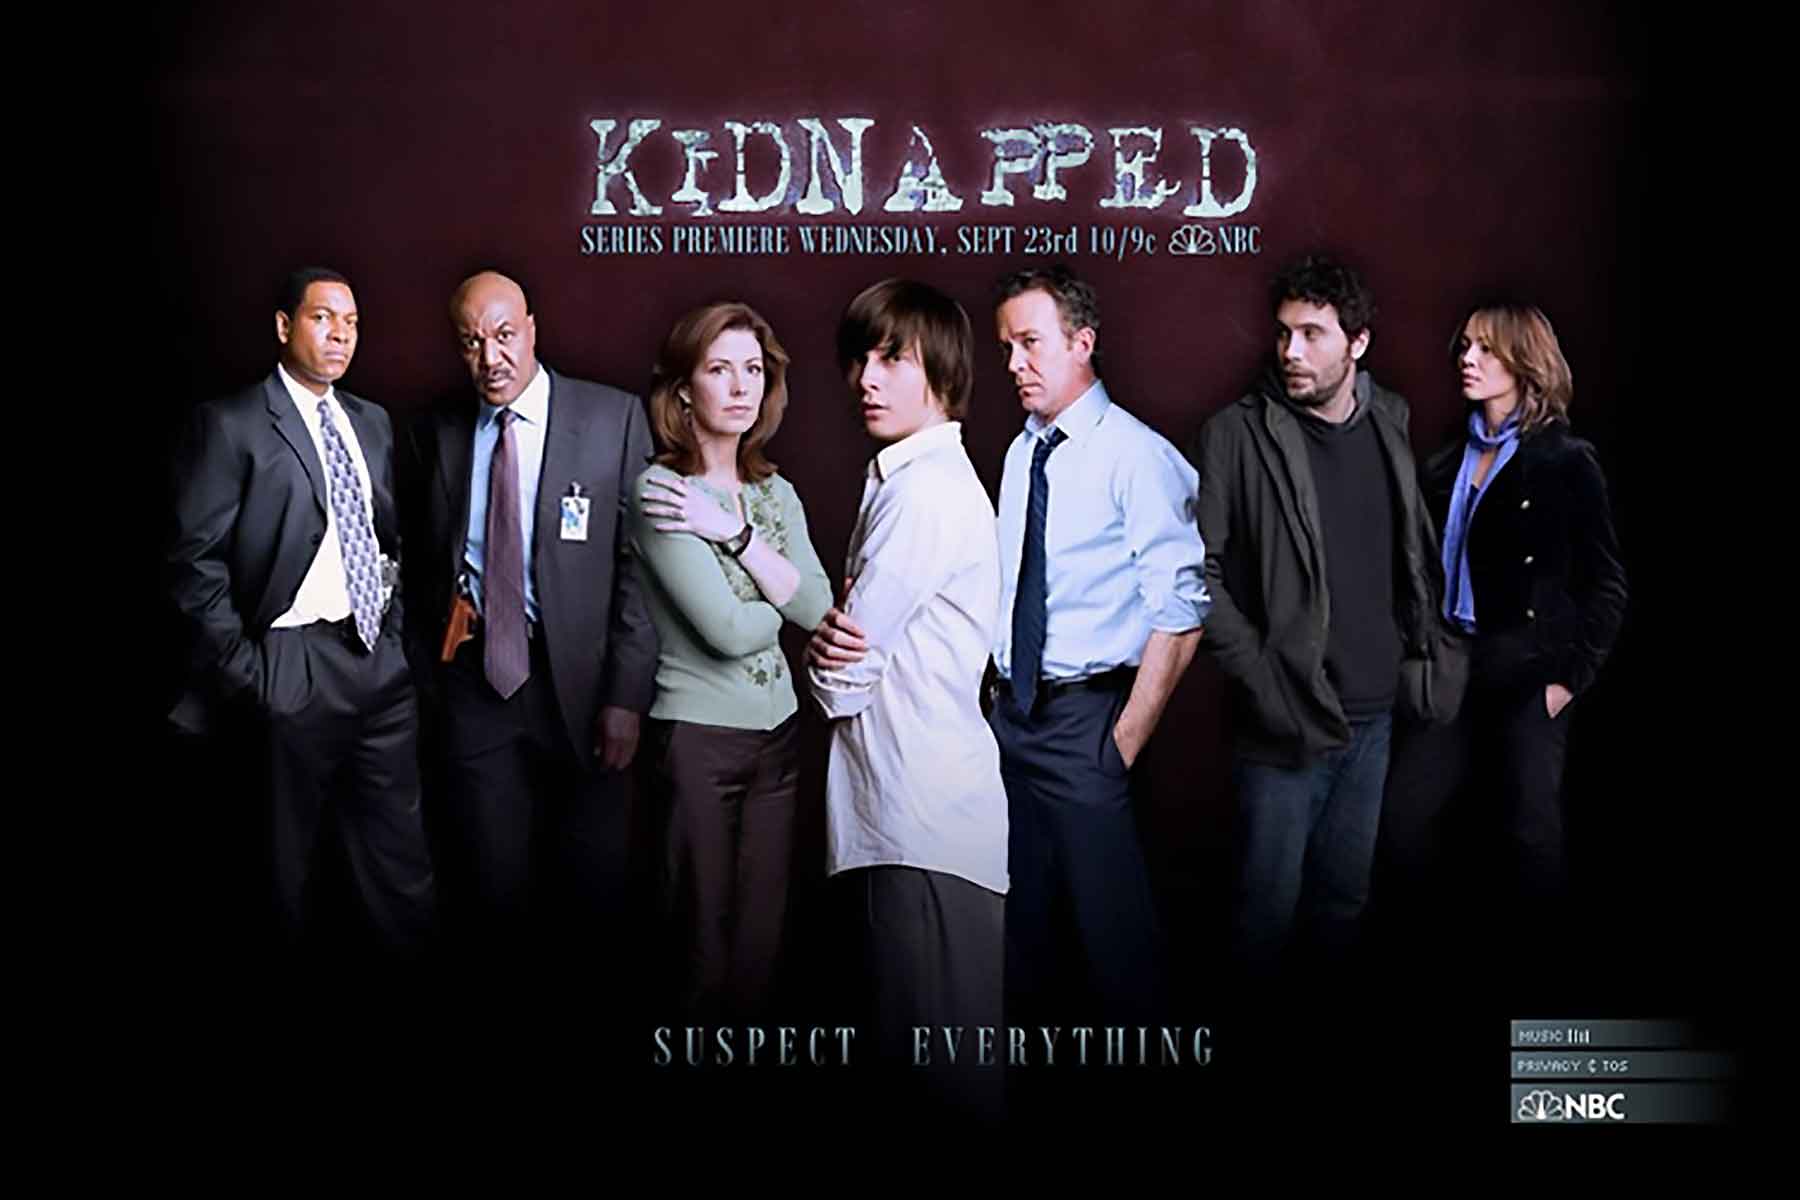 NBC Cancels New Series 'Kidnapped' After Low Ratings